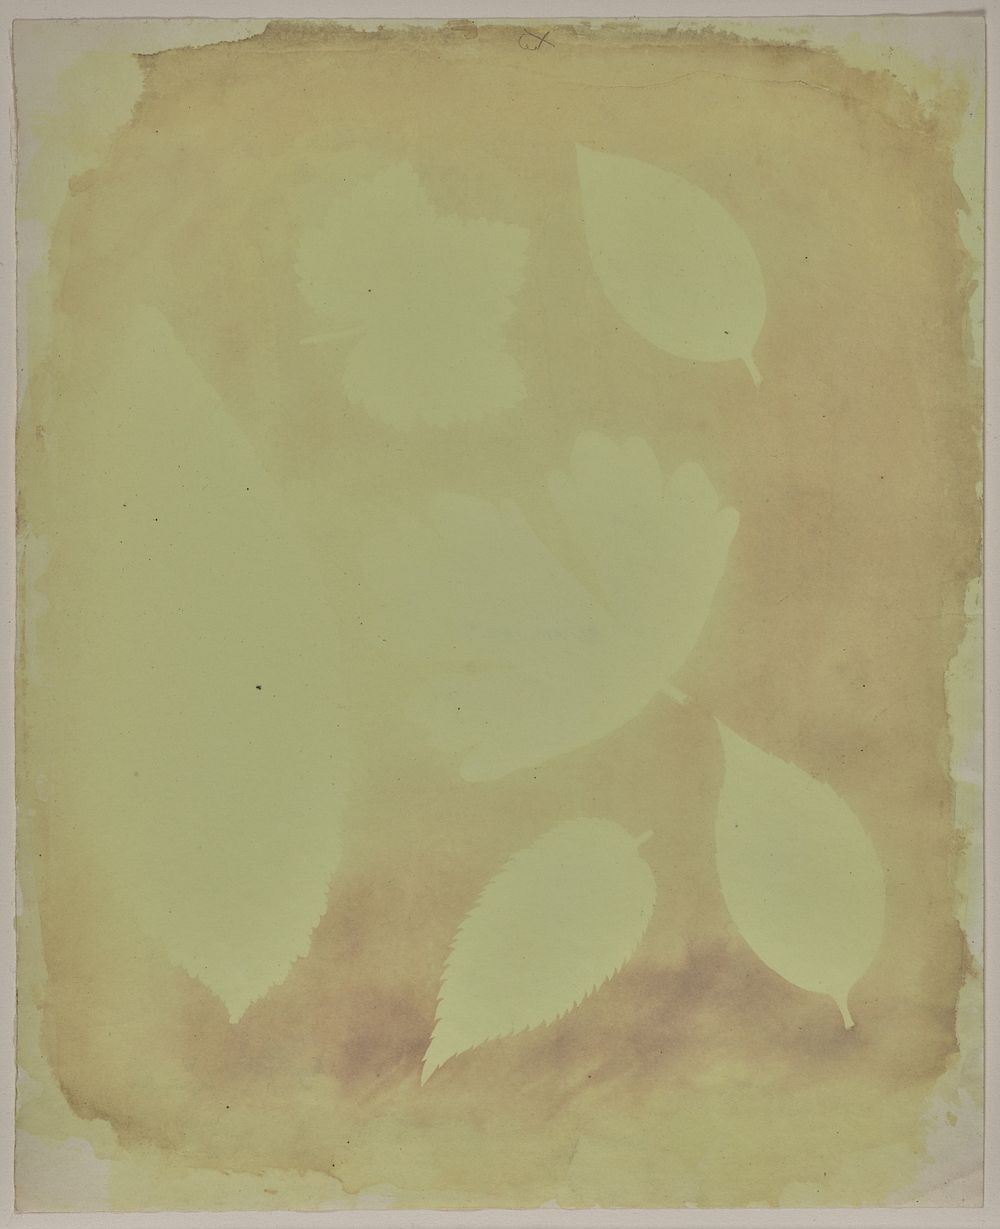 Arrangement of Six Leaves (Sunlight Test of Fixing) by William Henry Fox Talbot